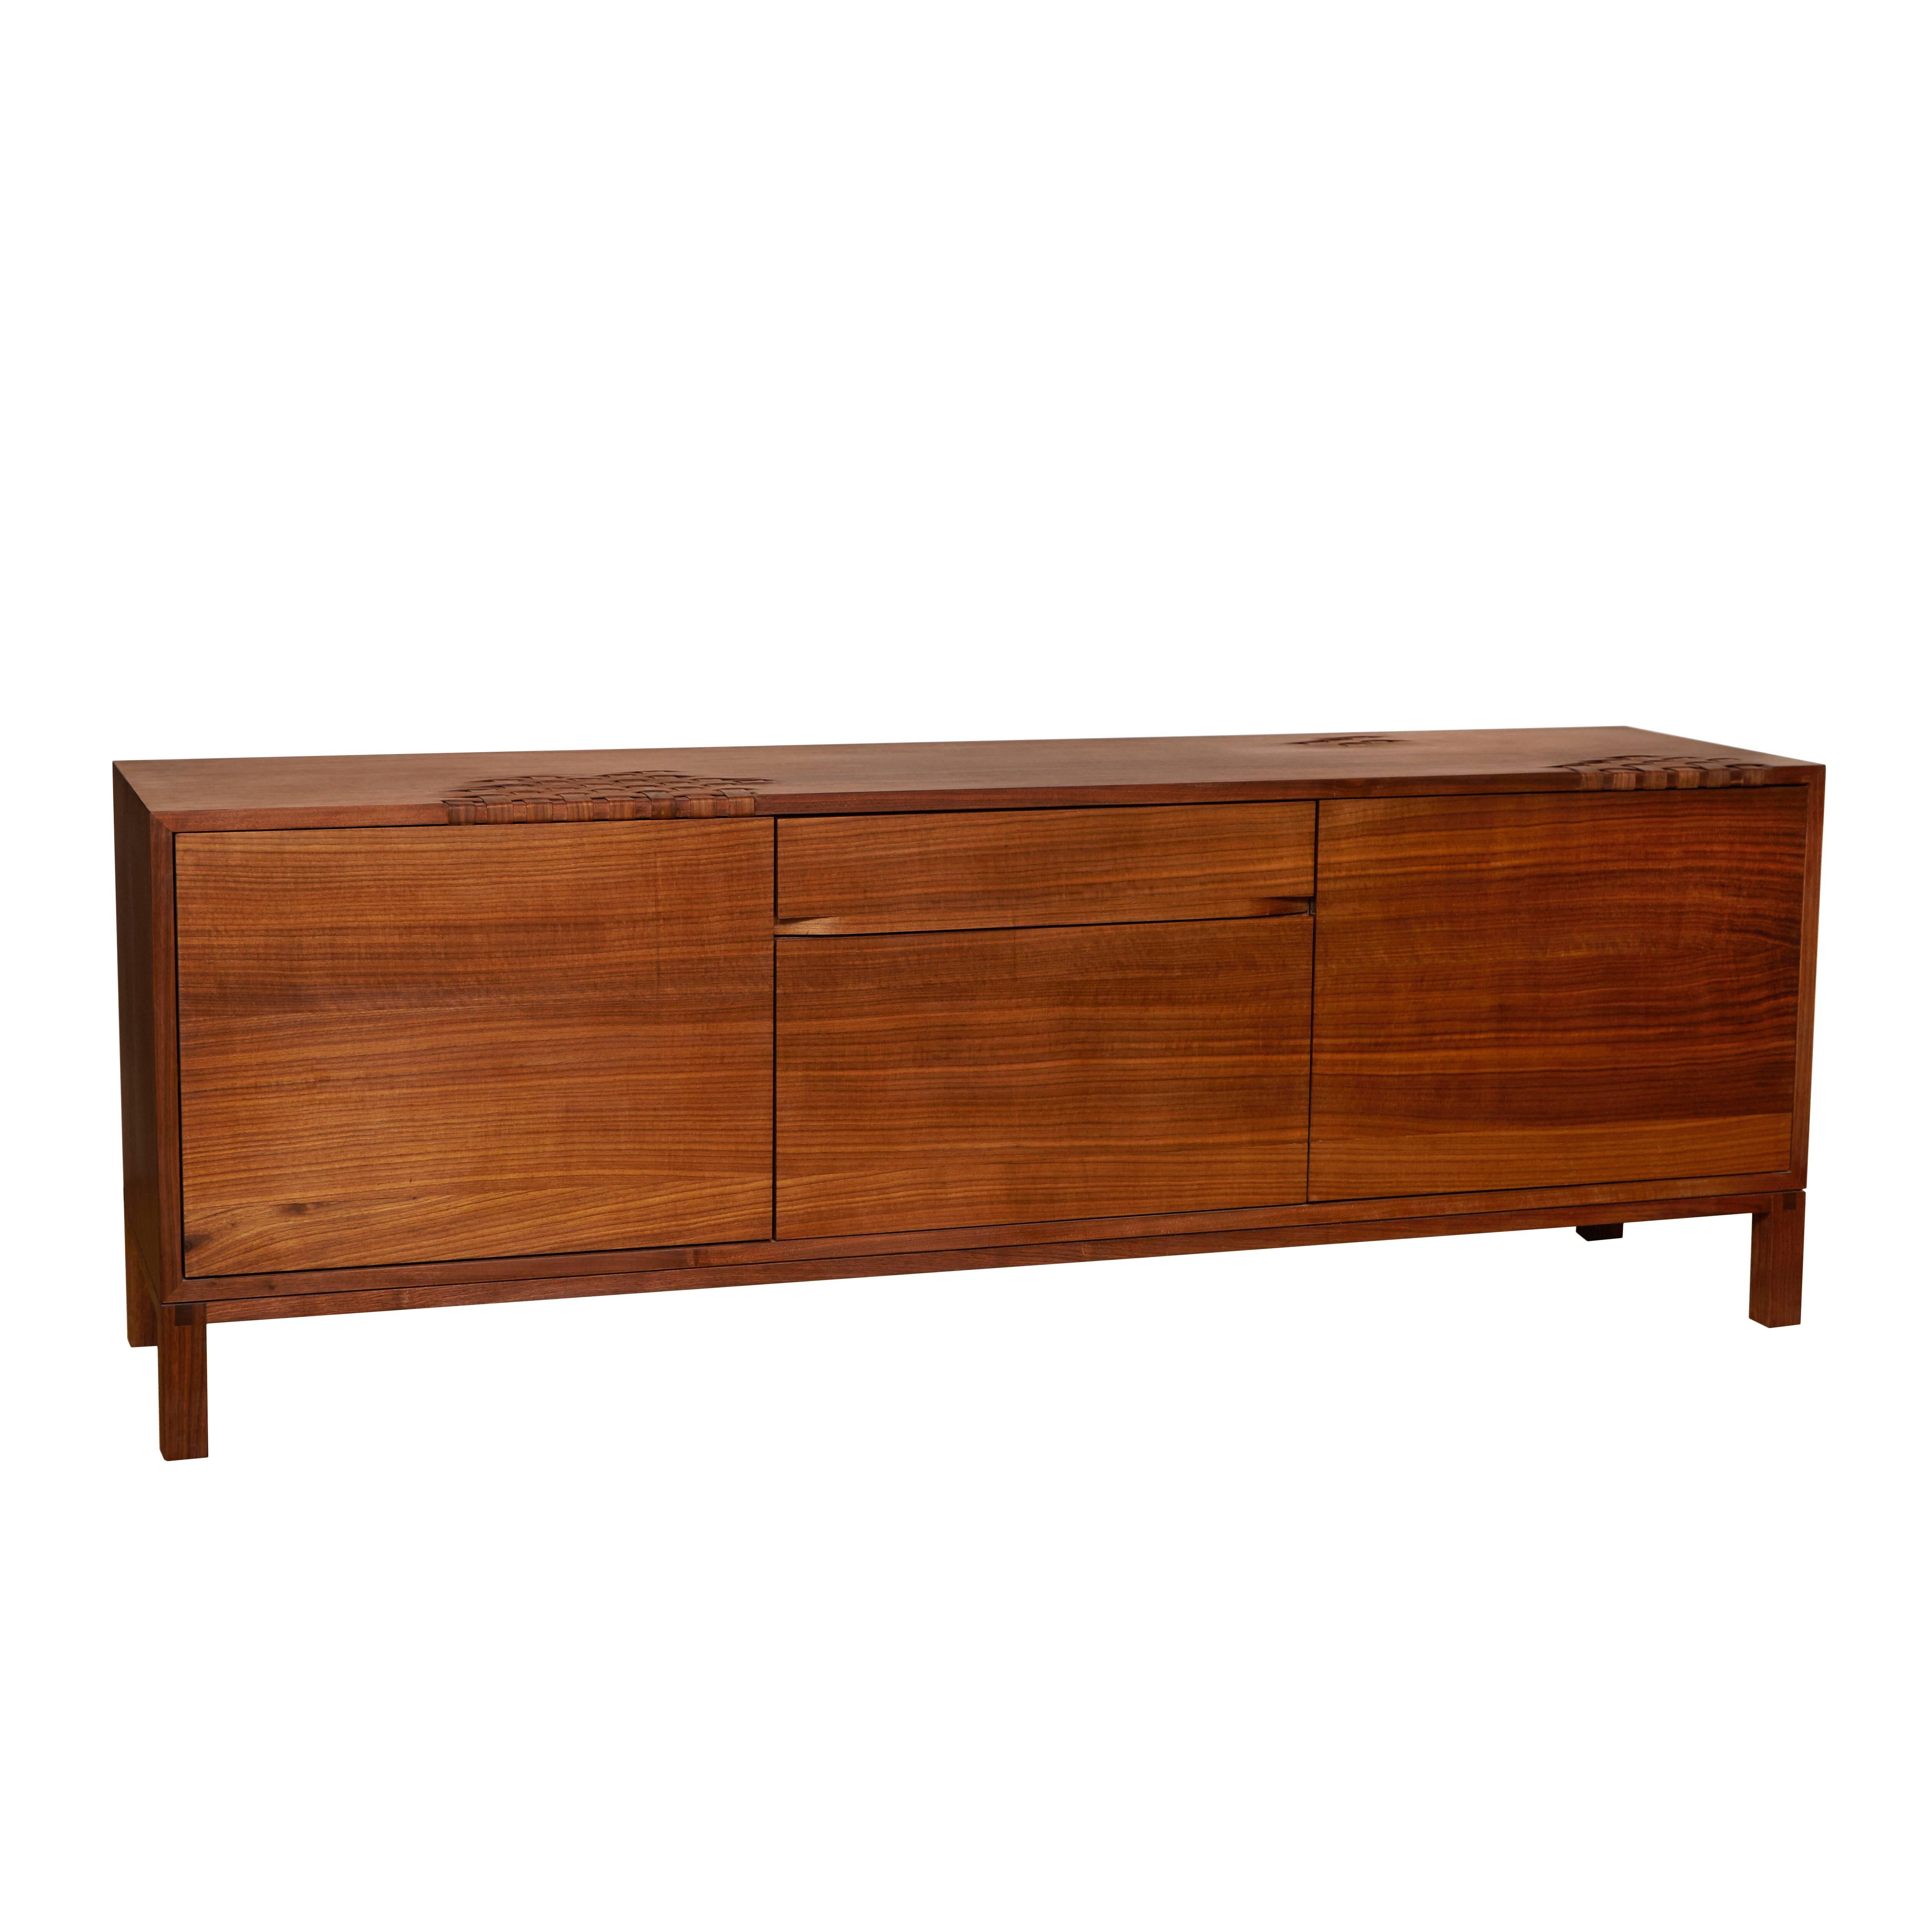 Oiled Walnut Weave Credenza by Don Howell For Sale